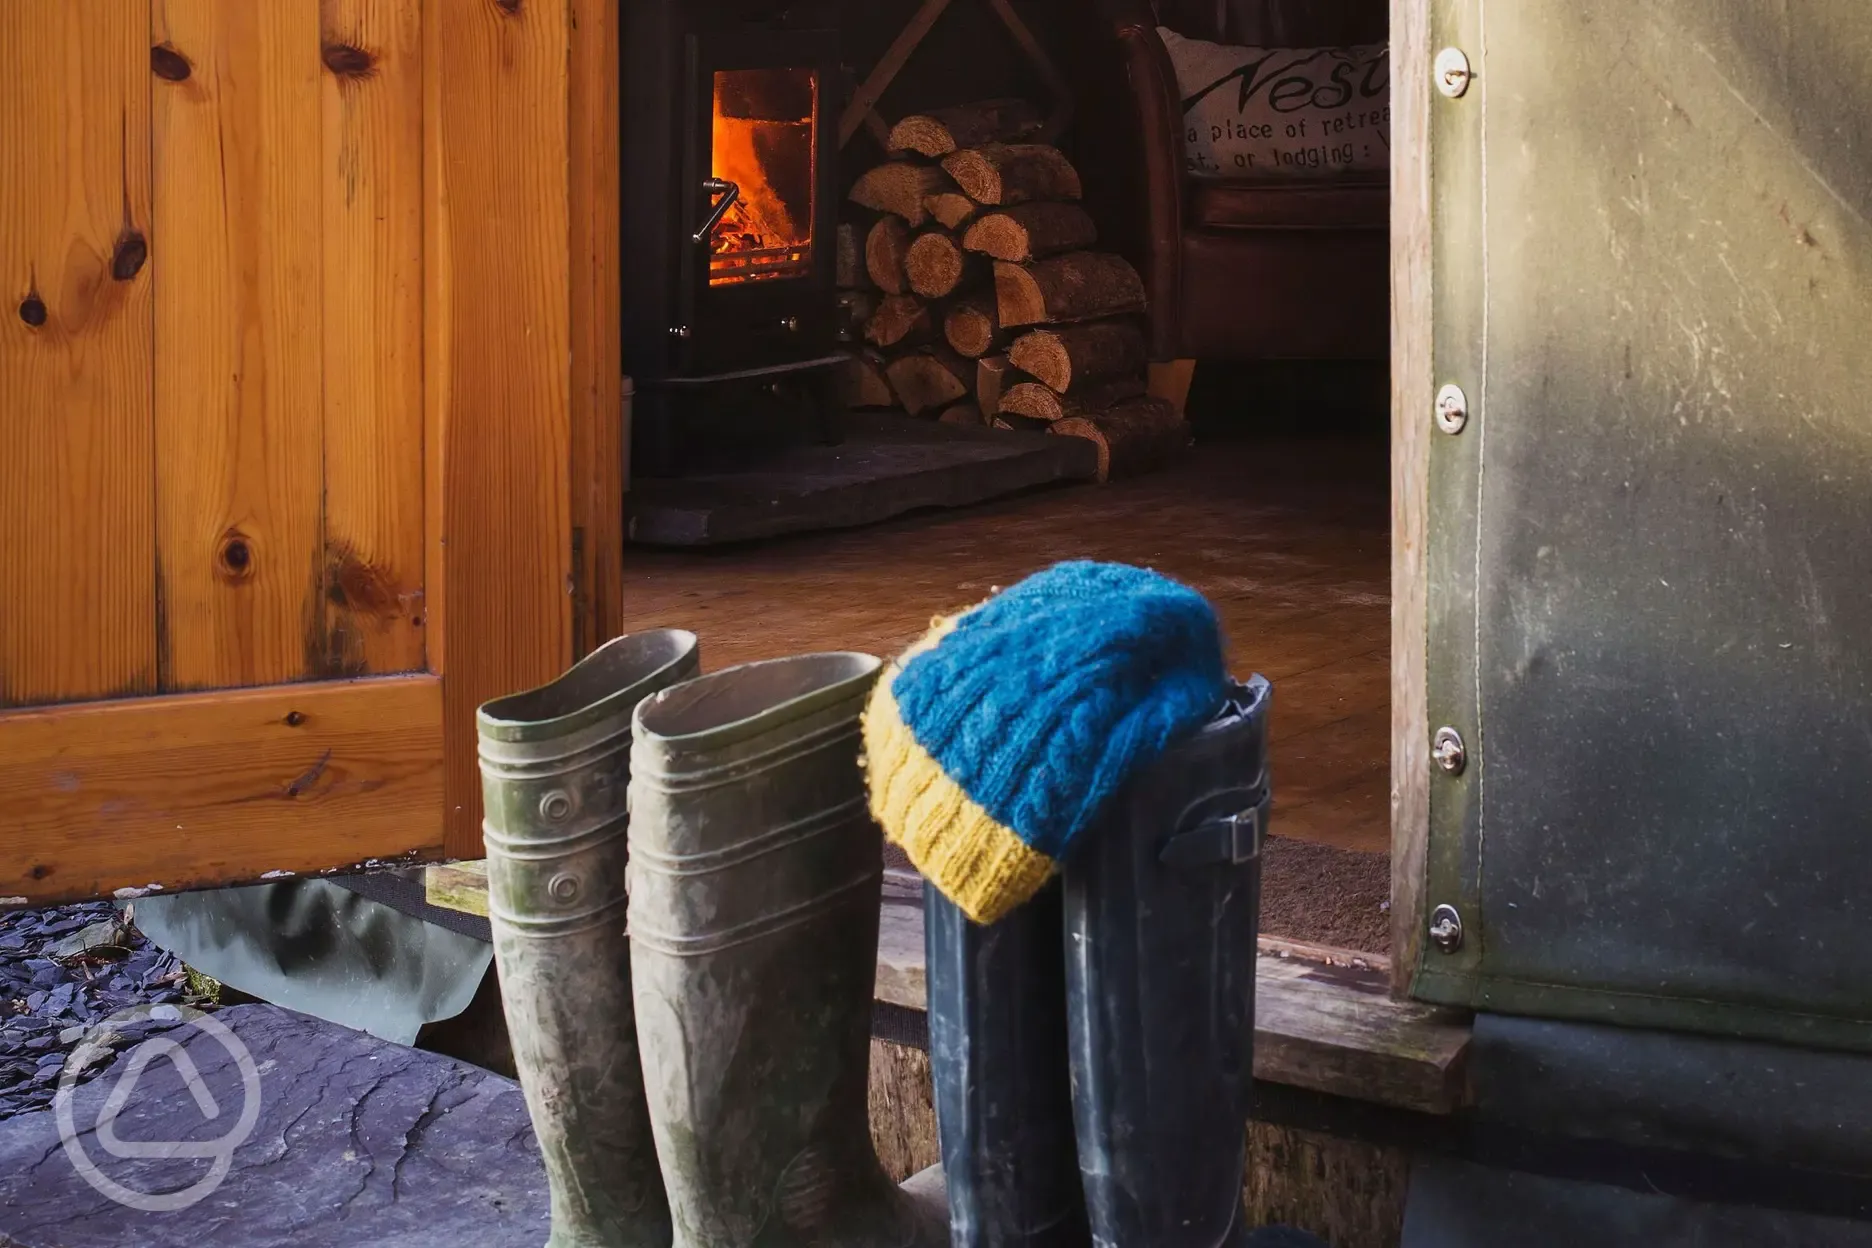 Boots and log fires